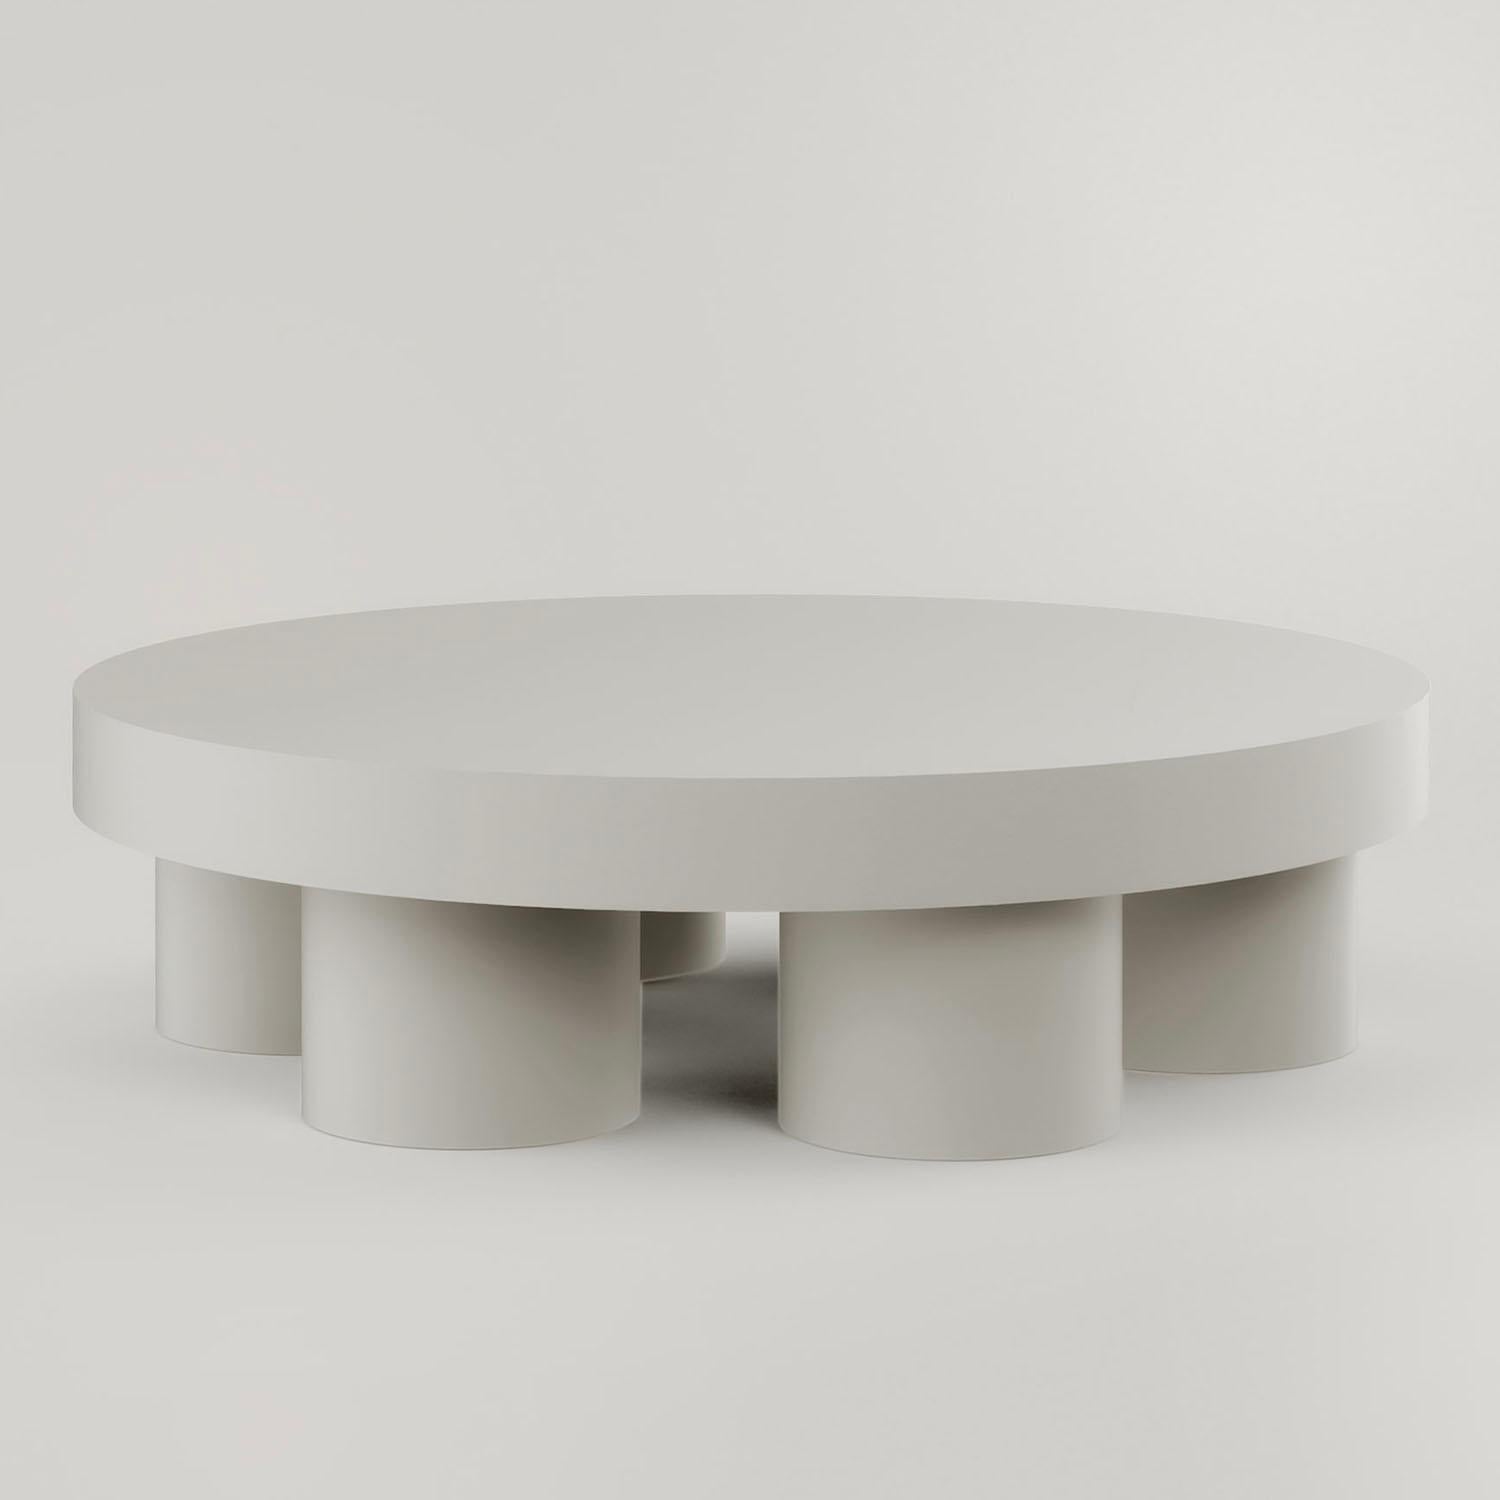 Contemporary Jesmonite coffee table - Pilotis Low Table by Malgorzata Bany.

Pilotis Low Table, a multifunctional statement piece crafted from Jesmonite. The latest addition to the ‘Pilotis’ range, the table encompasses the pure, clean aesthetic